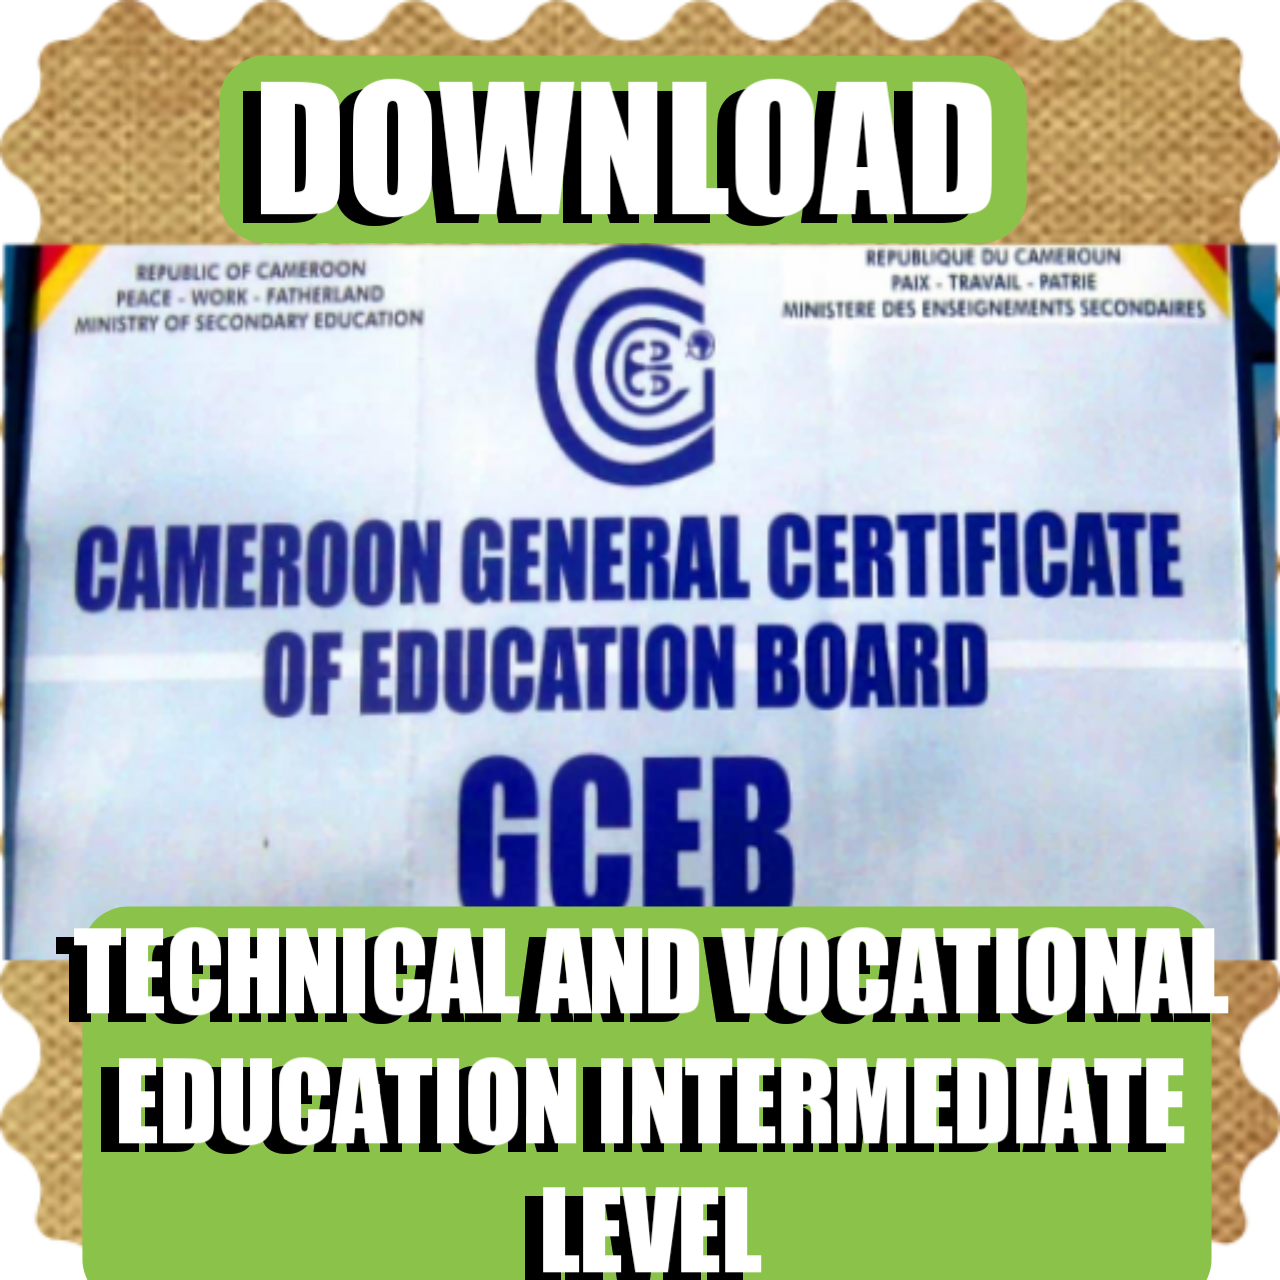 download pdf: Technical and Vocational Education Intermediate results 2021